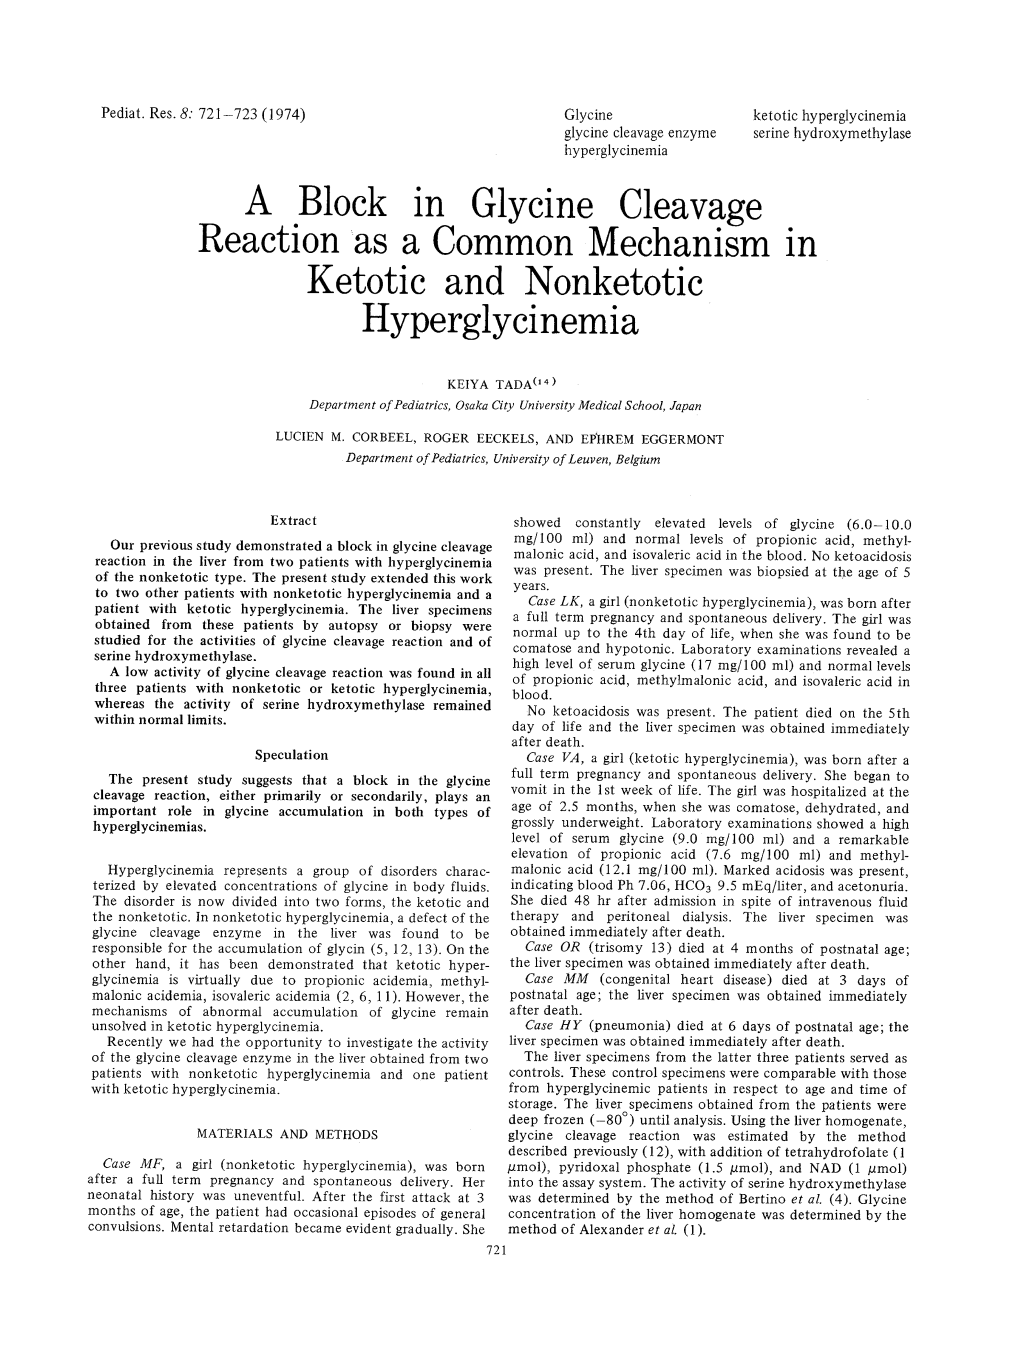 A Block in Glycine Cleavage Reaction As a Common Mechanism in Ketotic and Nonketotic Hyperglycinemia